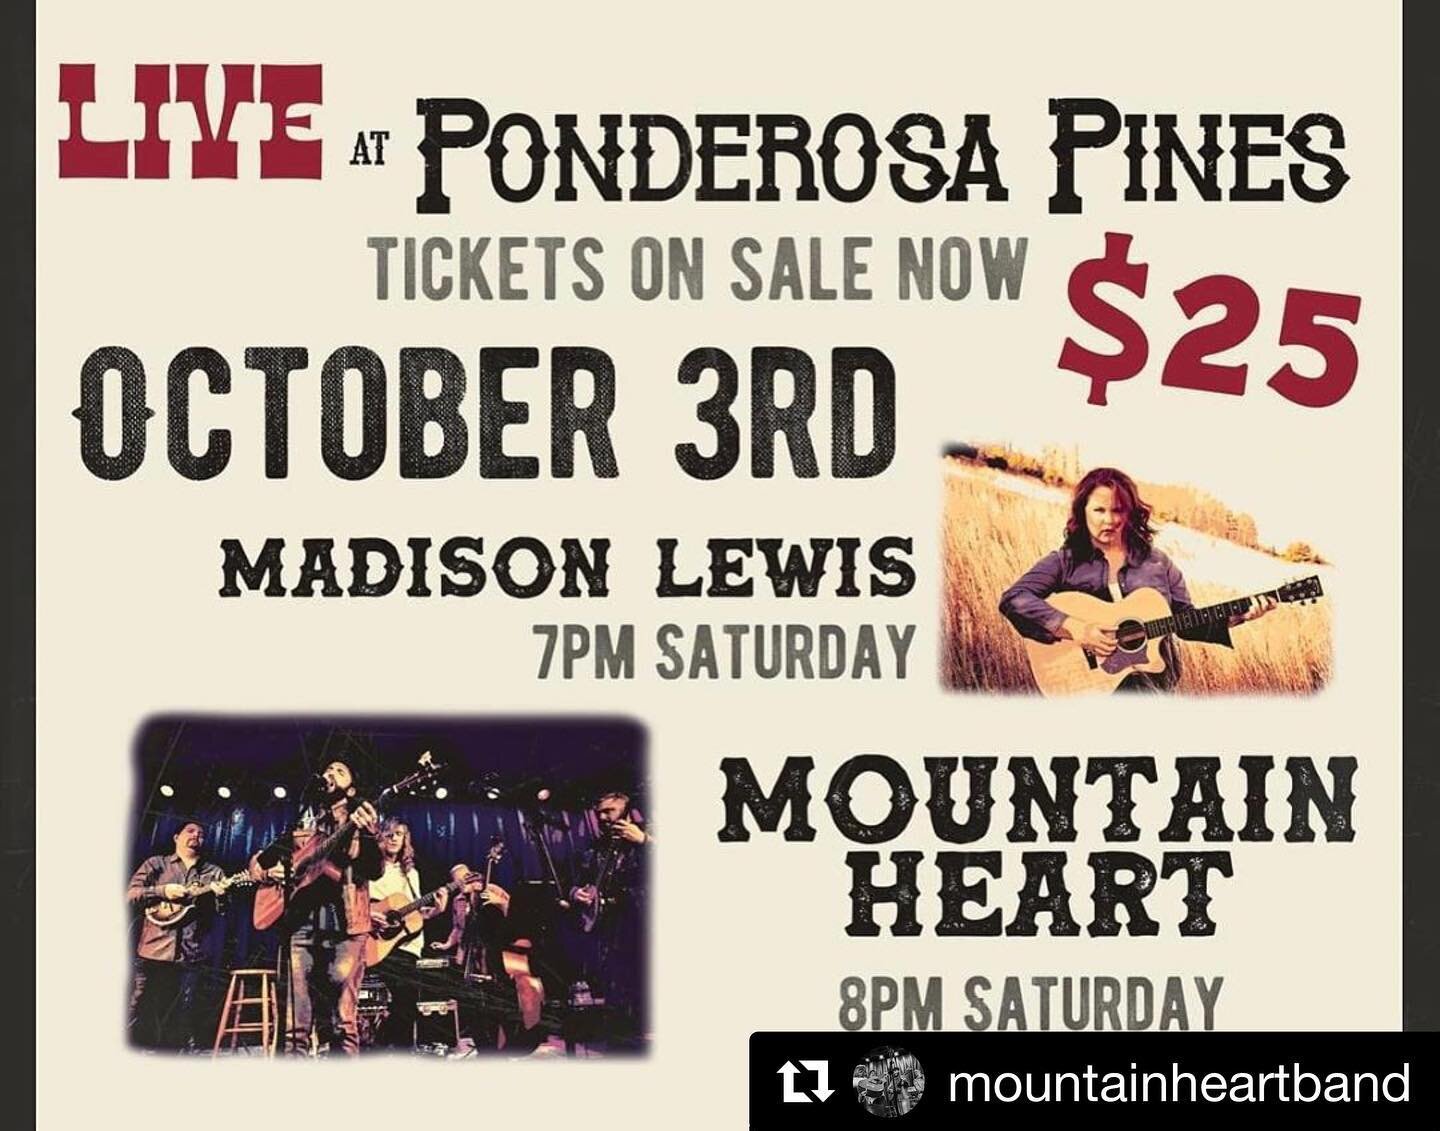 Can't wait to see our Kentucky friends 🙌

#Repost @mountainheartband
・・・
We&rsquo;re looking forward to jamming for our friends in KY on 10/3! Limited tickets available, so get em while you can! 🍂 🎶